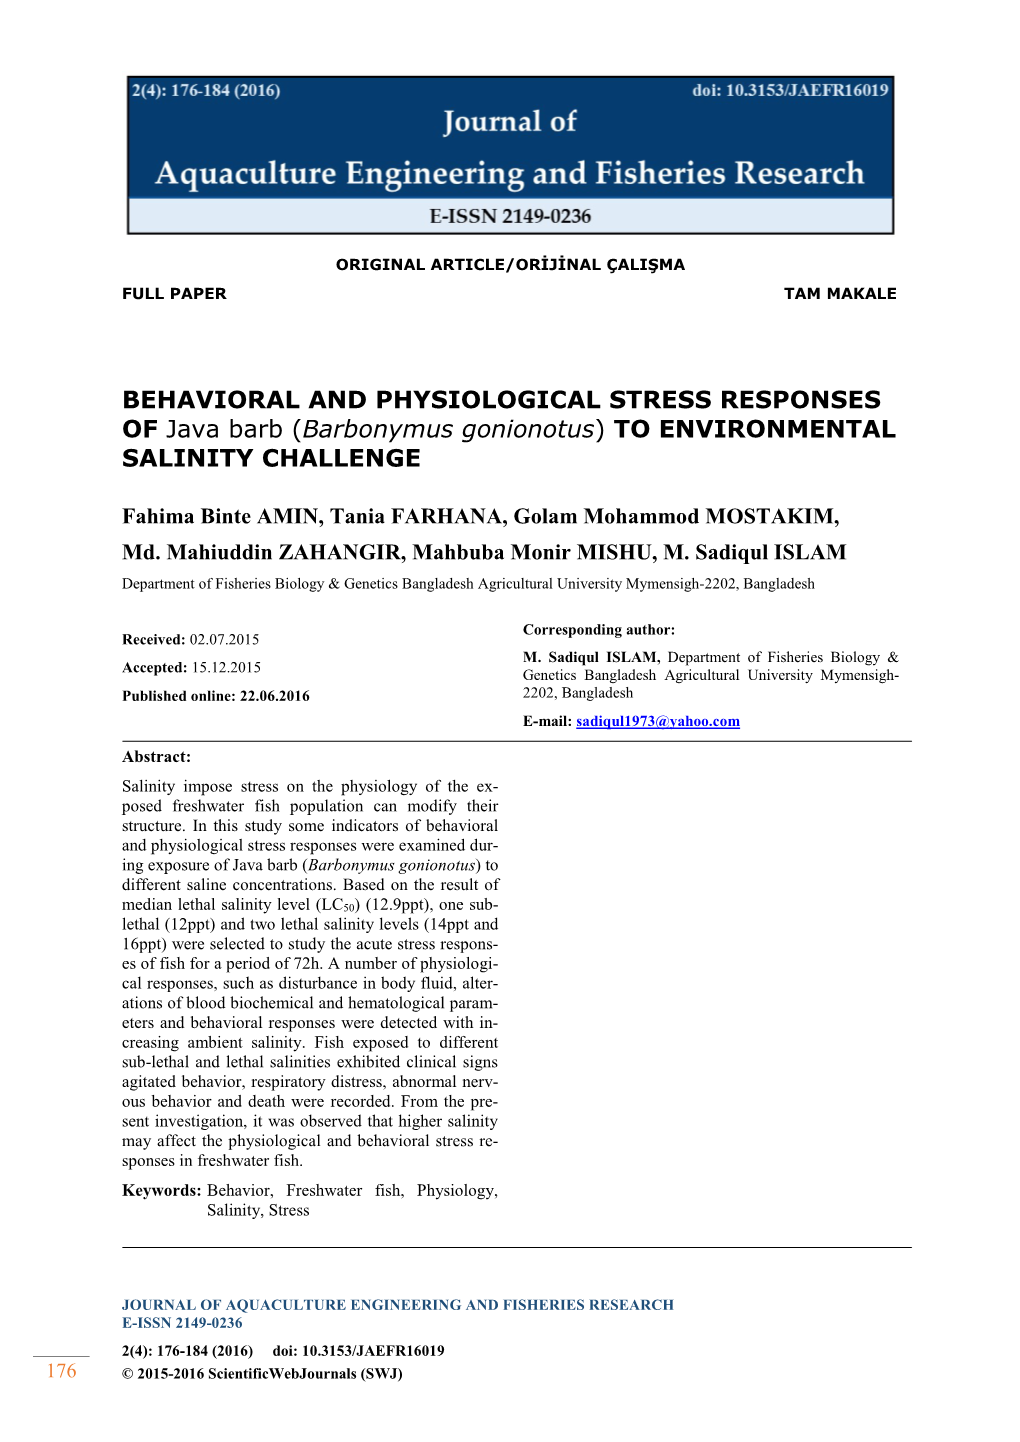 BEHAVIORAL and PHYSIOLOGICAL STRESS RESPONSES of Java Barb (Barbonymus Gonionotus) to ENVIRONMENTAL SALINITY CHALLENGE